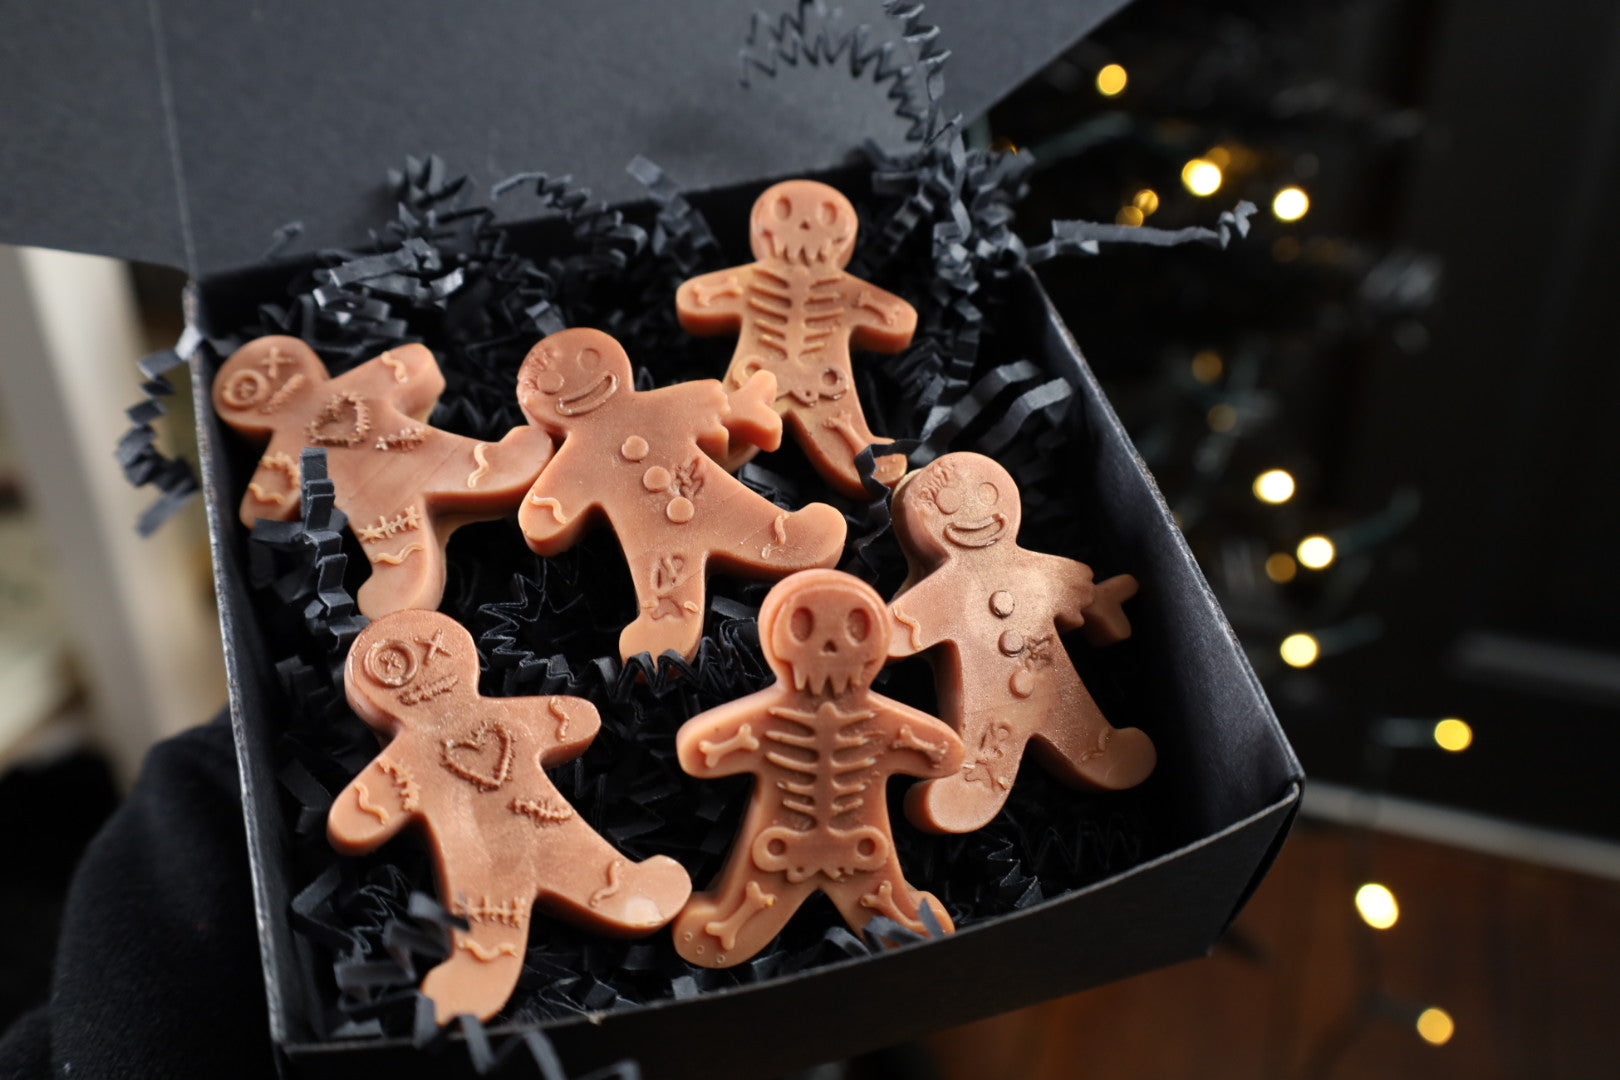 Limited Edition Gingerdead Souls Wax Melts